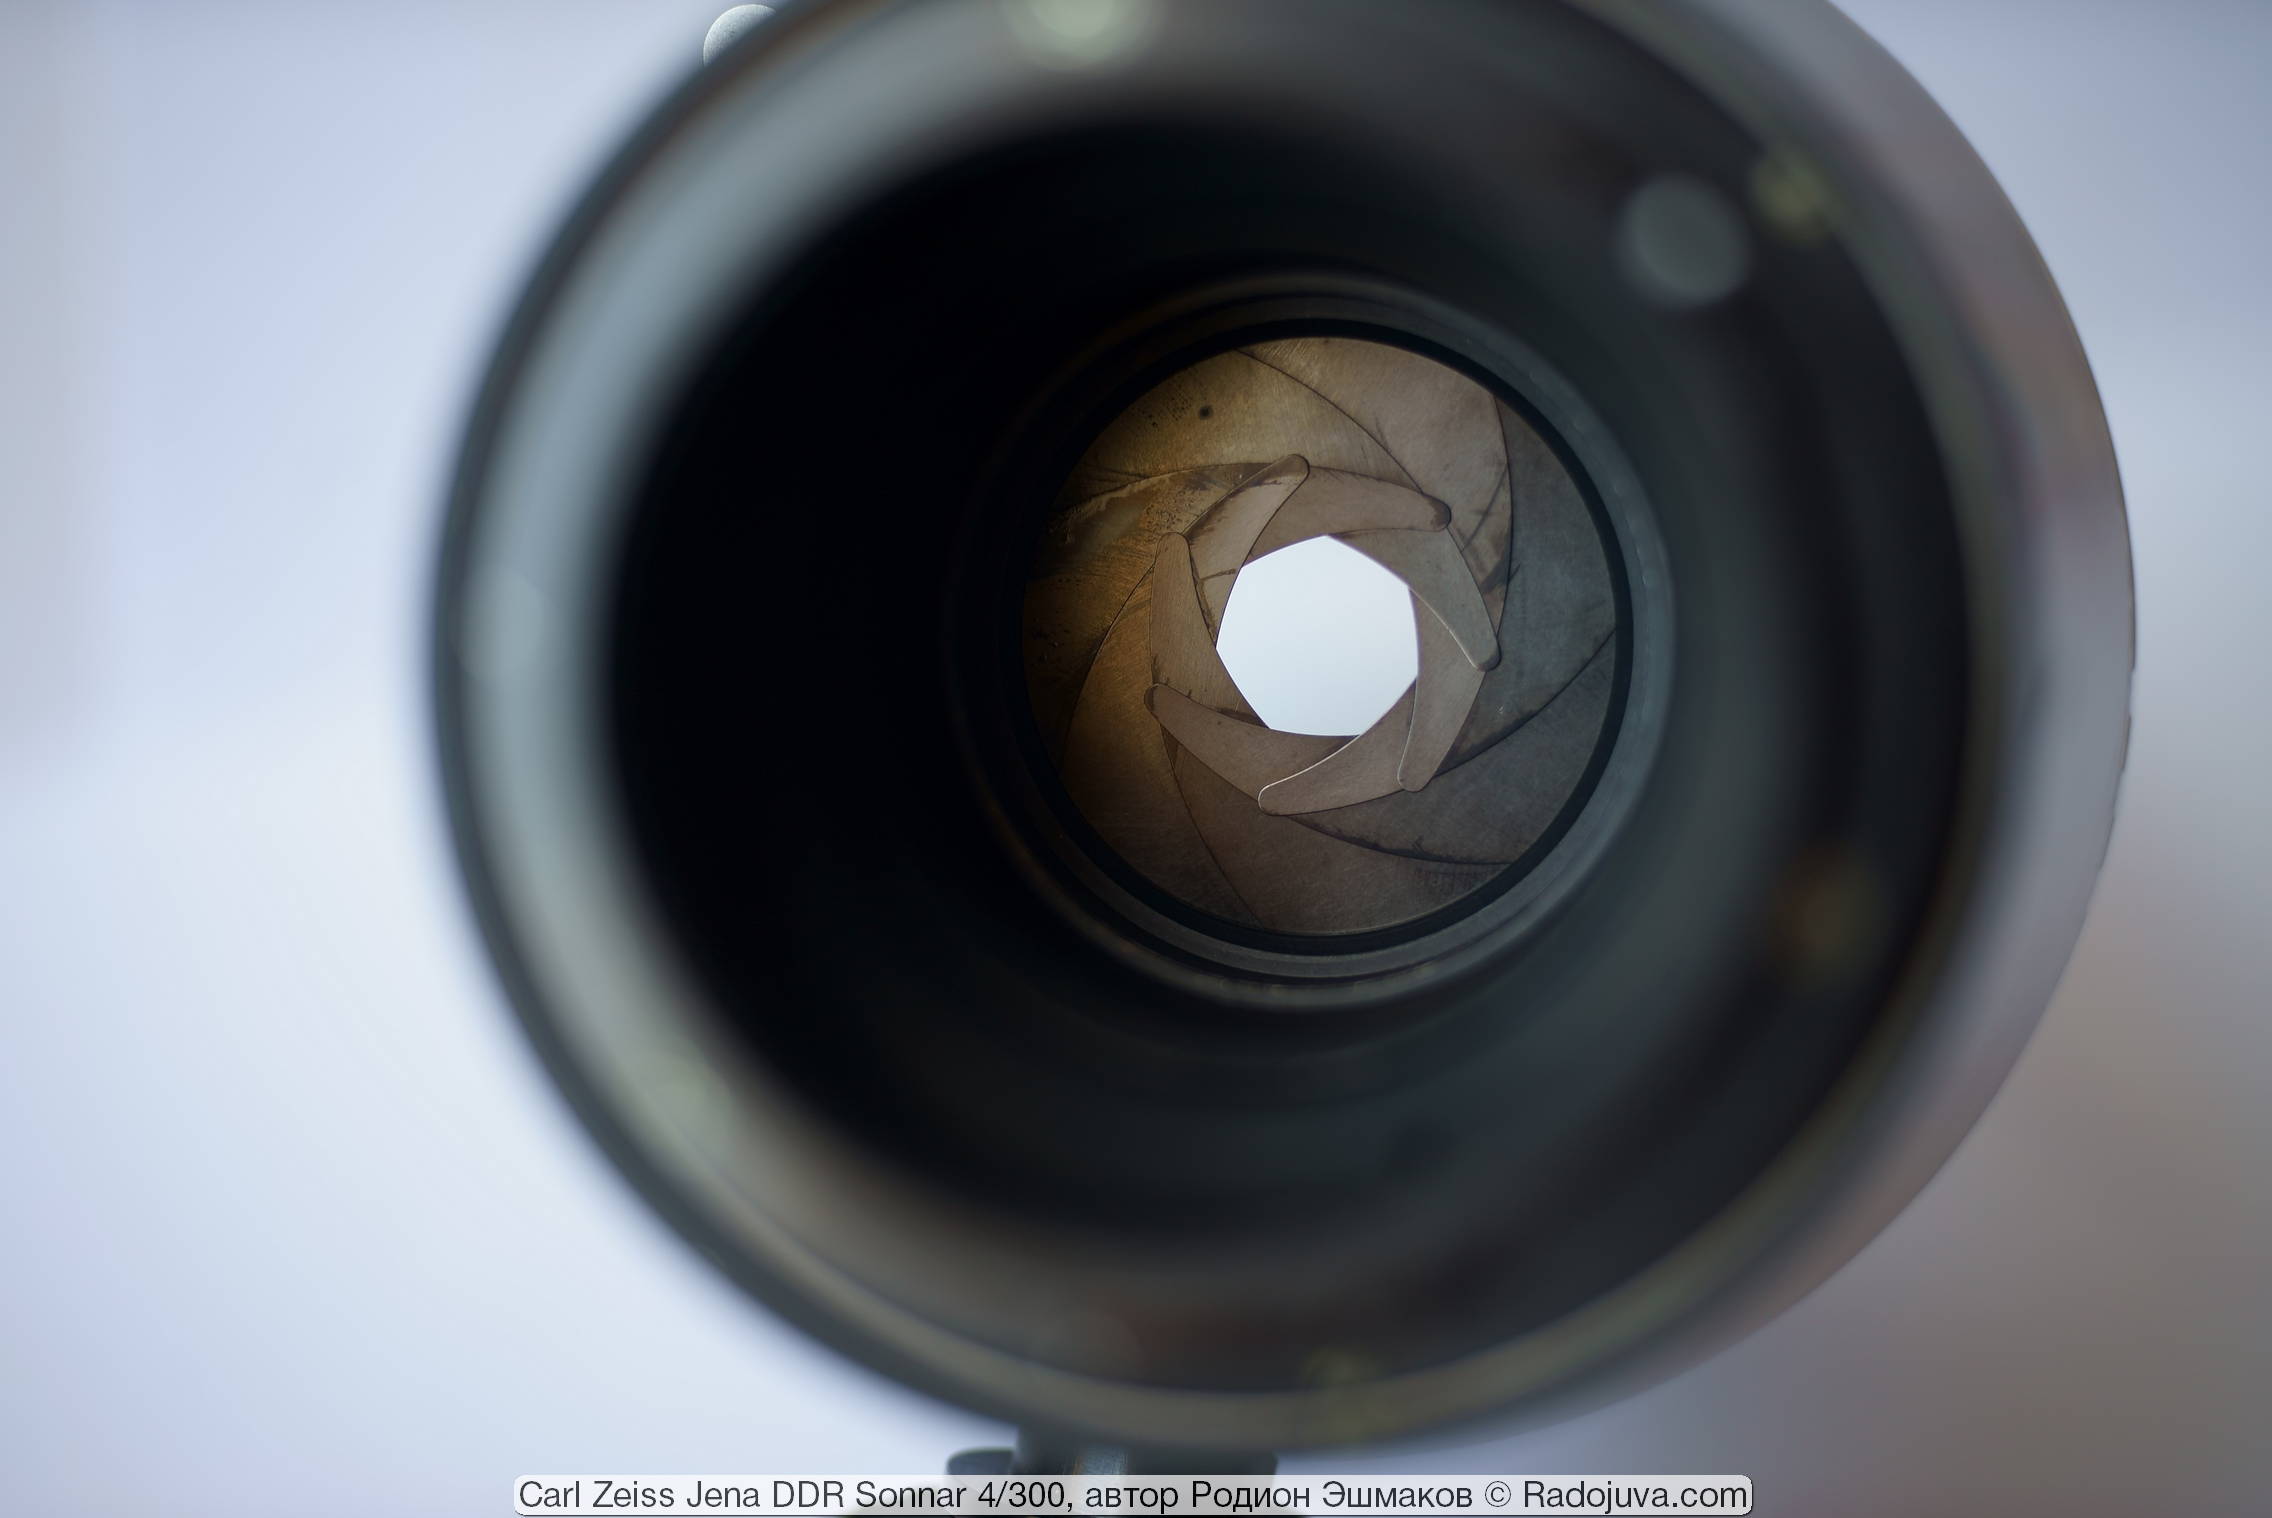 View of the Sonnar 4/300 diaphragm from the bayonet side with the protective glass removed.